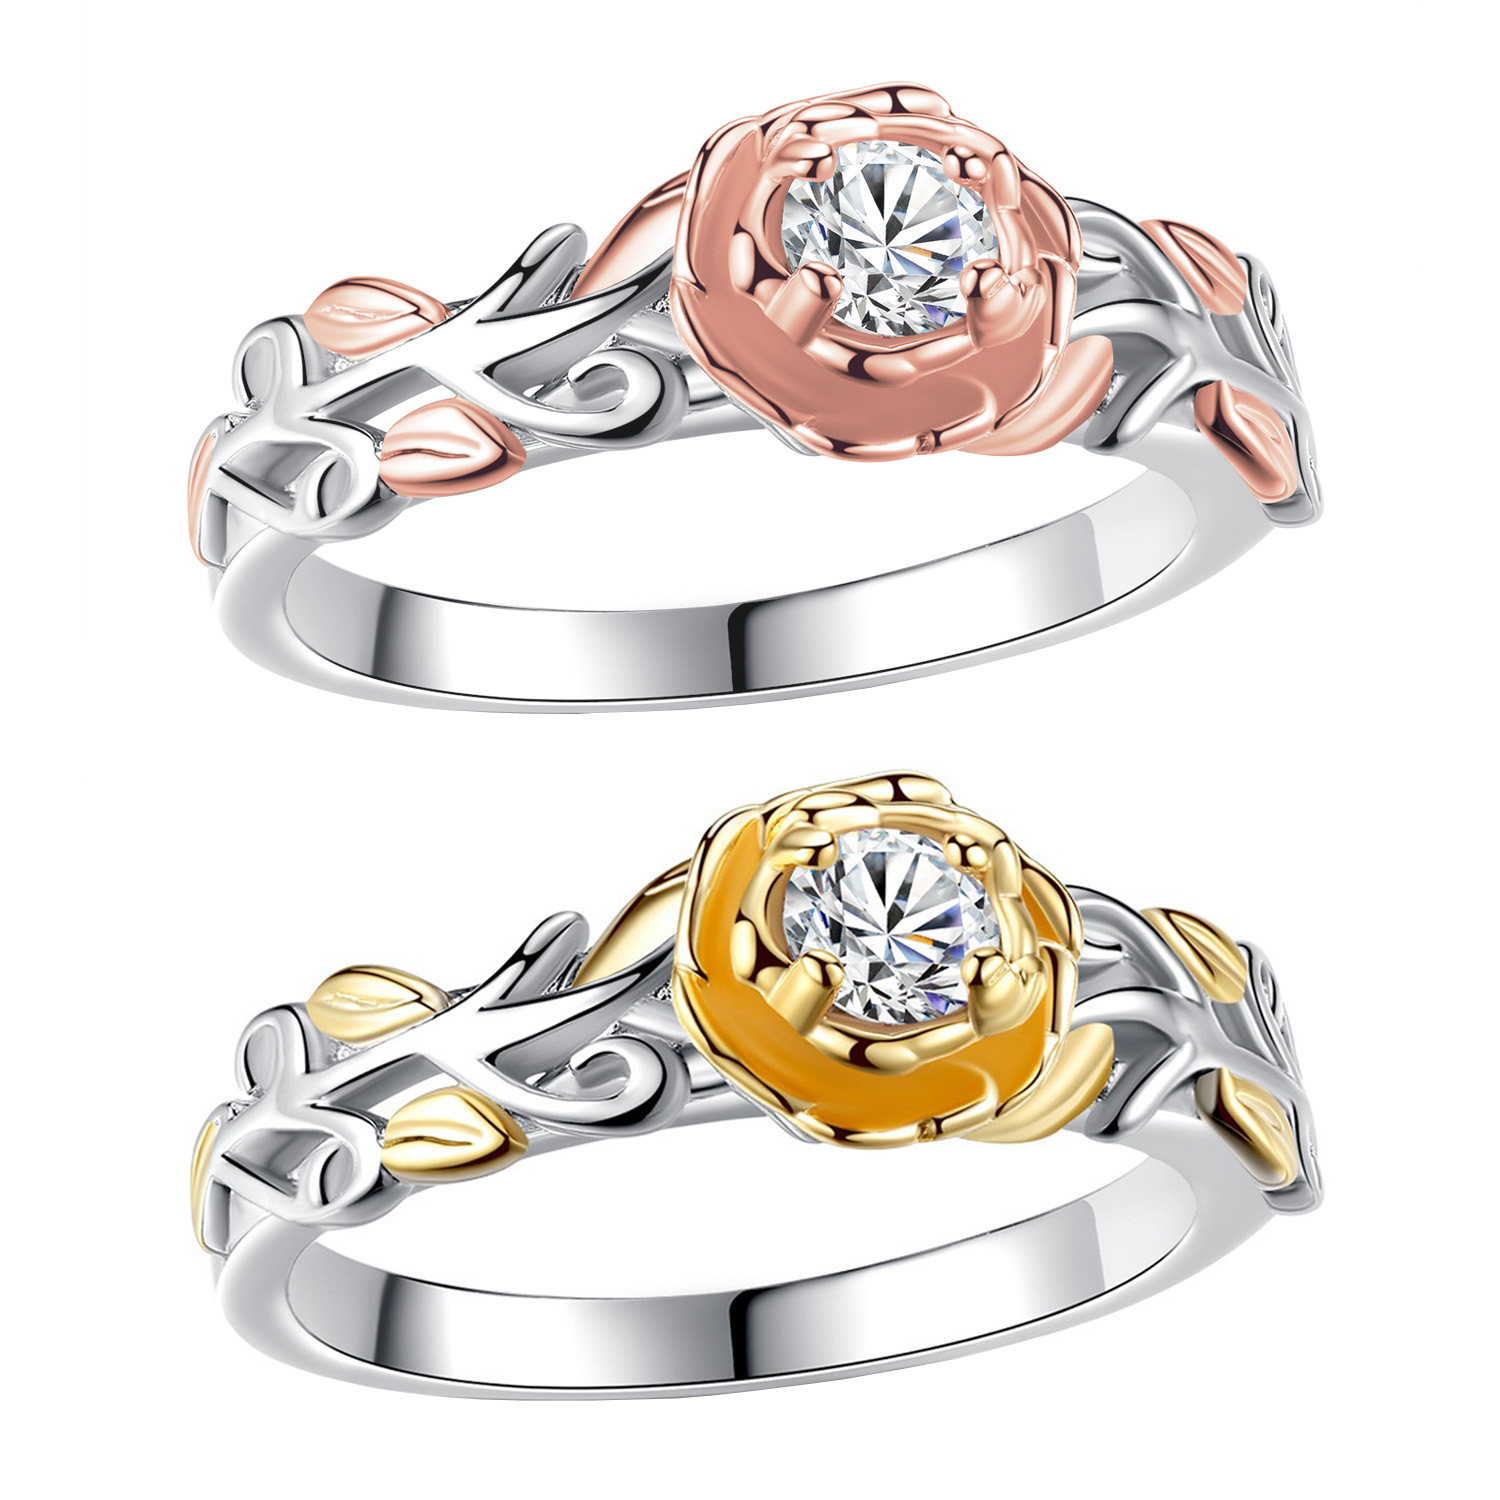 40 x Silver Plated Flower Crystal Ring in Gold & Rose Gold, Two Colours, 4 Sizes (K, M, P, R)  l UK SELLER l GCJR077